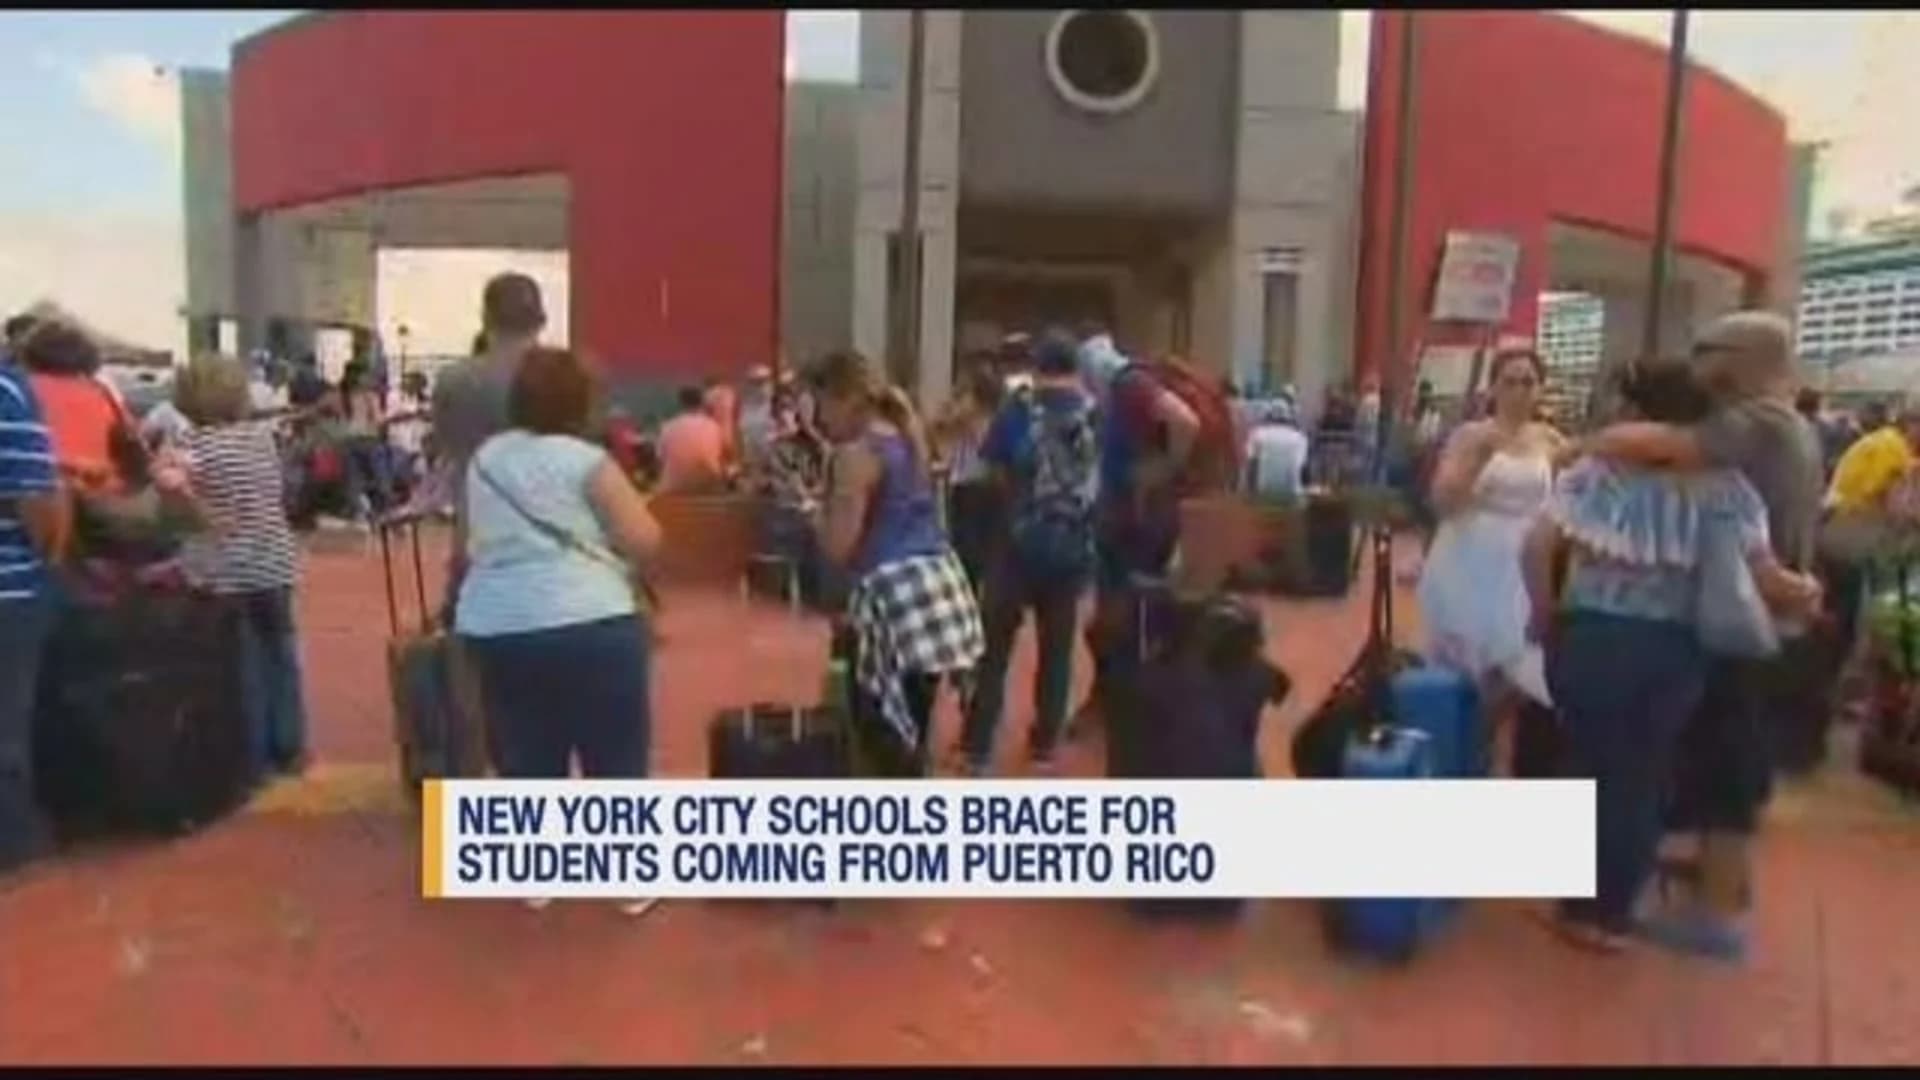 NYC schools prepare for incoming students from Puerto Rico